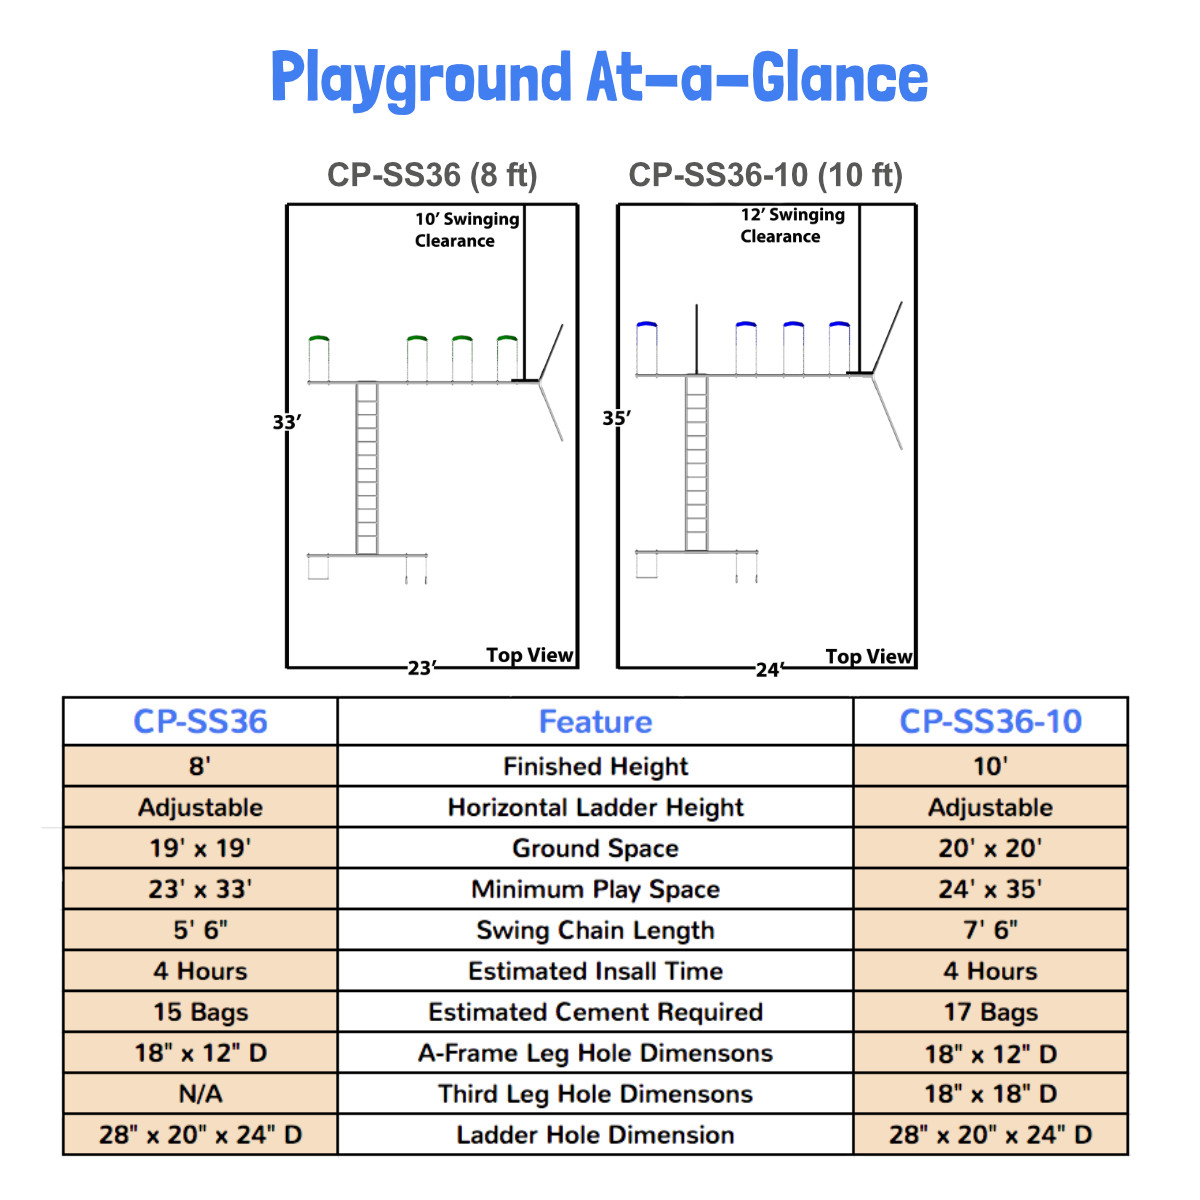 Metal Super Swing Set with 4 Swings (CP-SS36)Playground at a Glance